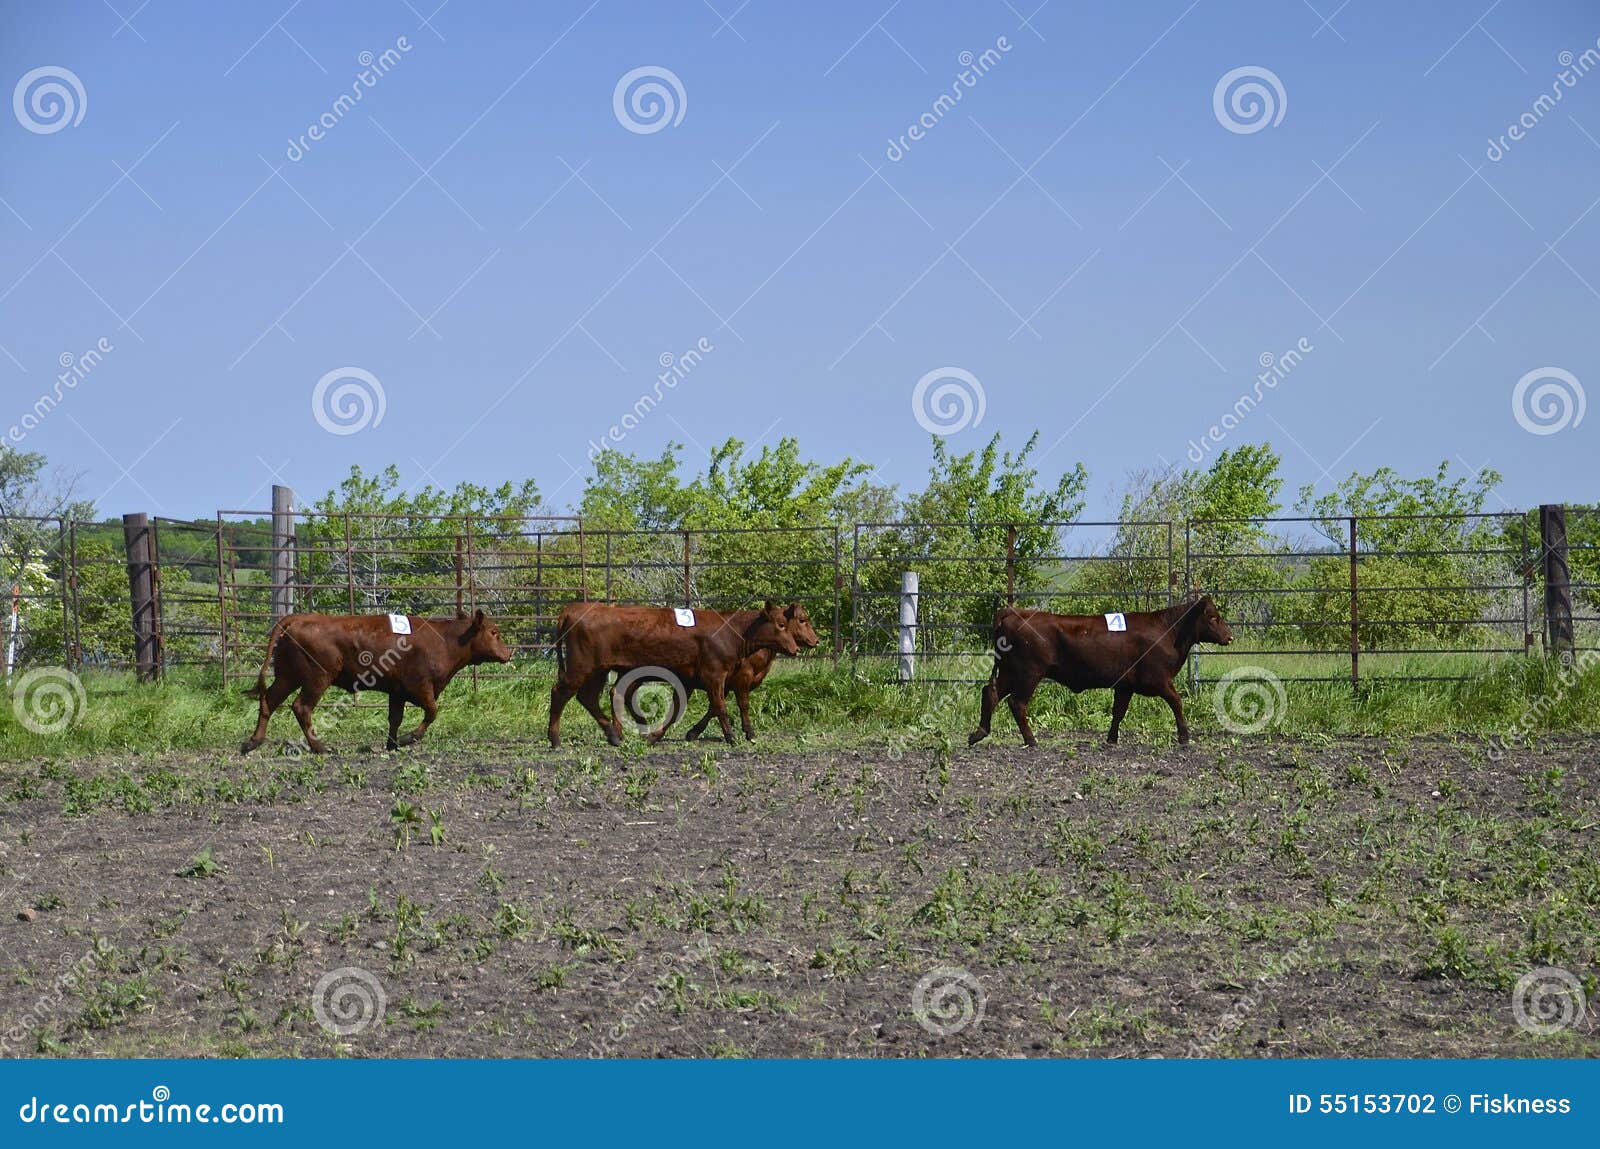 rodeo cattle running in corral